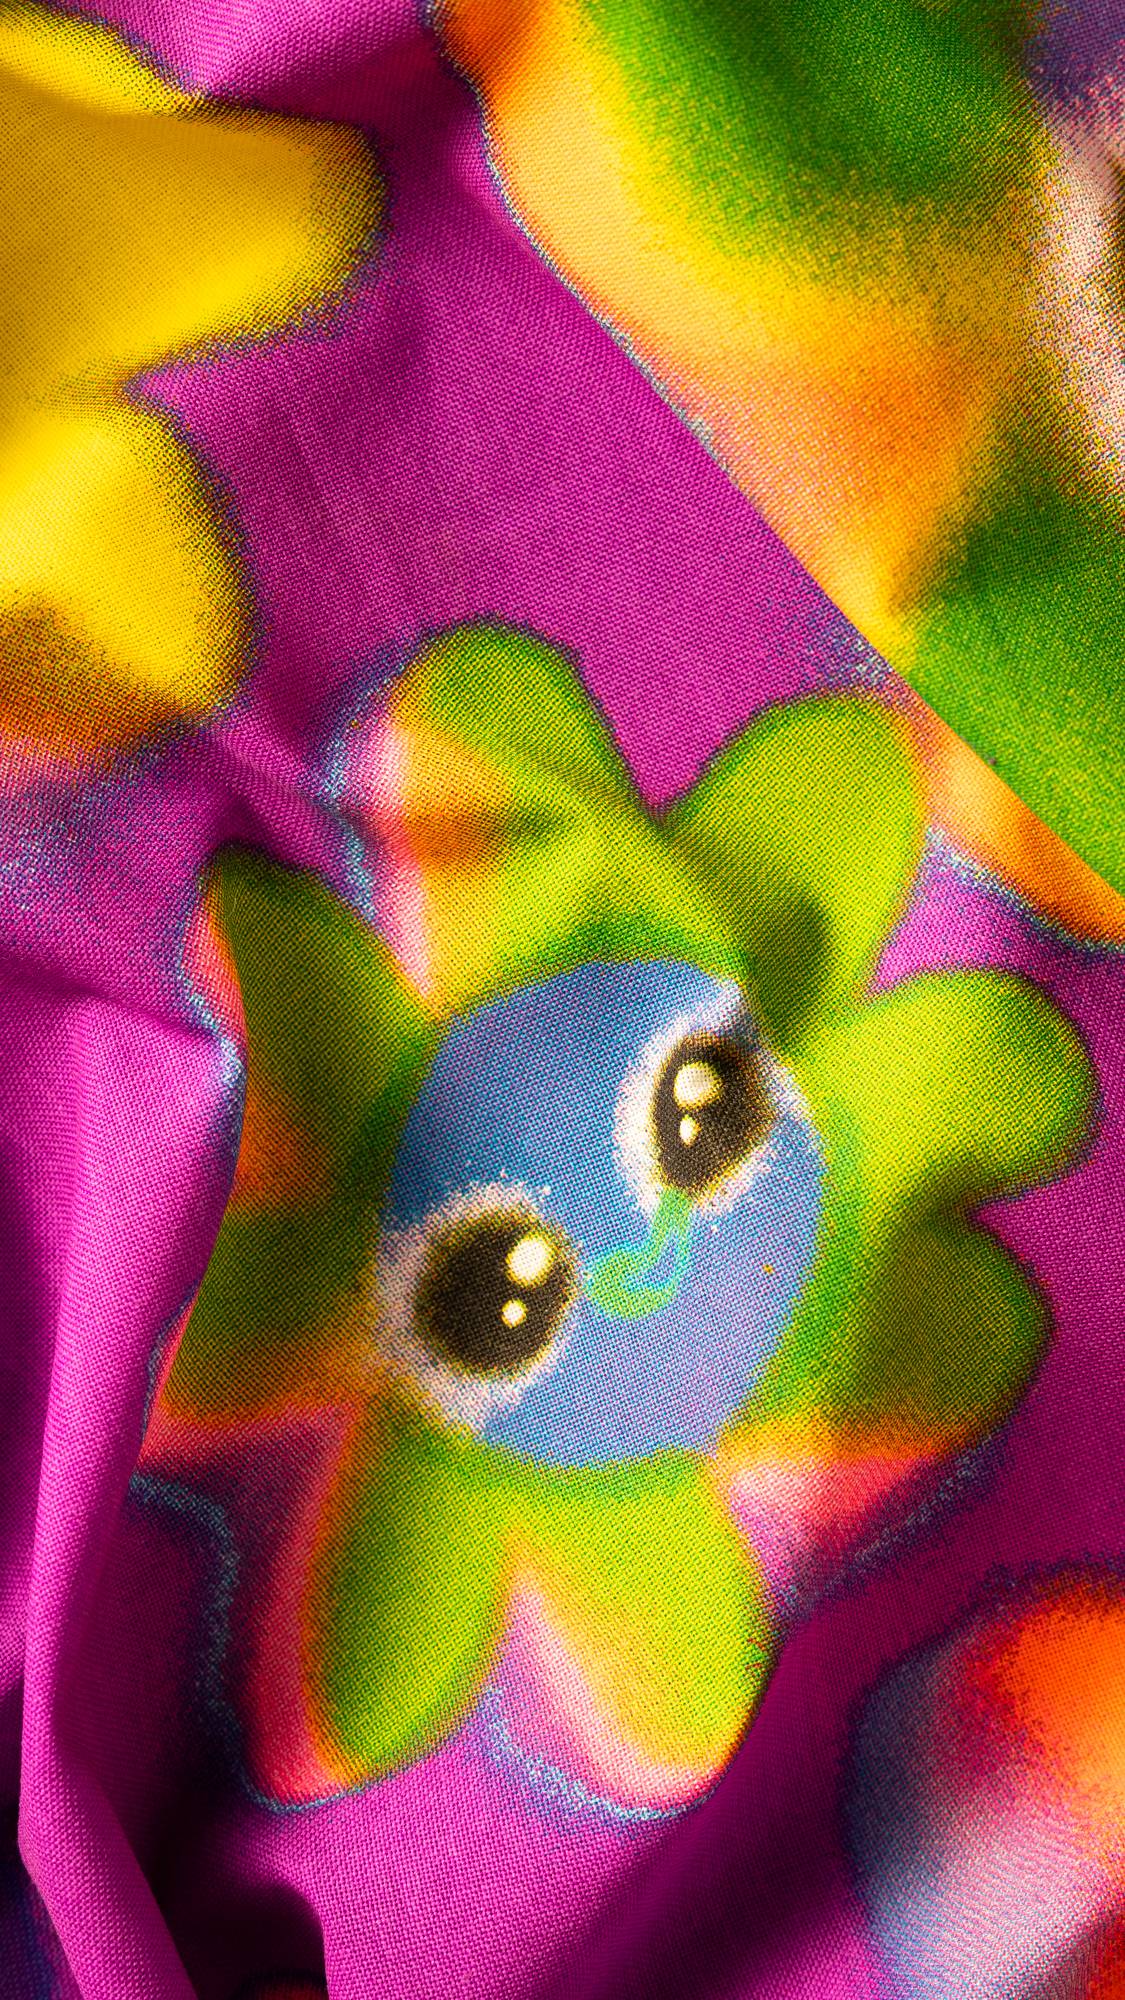 Image shows a super close-up of the Soopa Frens knot wrap with a deep purple background and vivid yellow and green flowers.